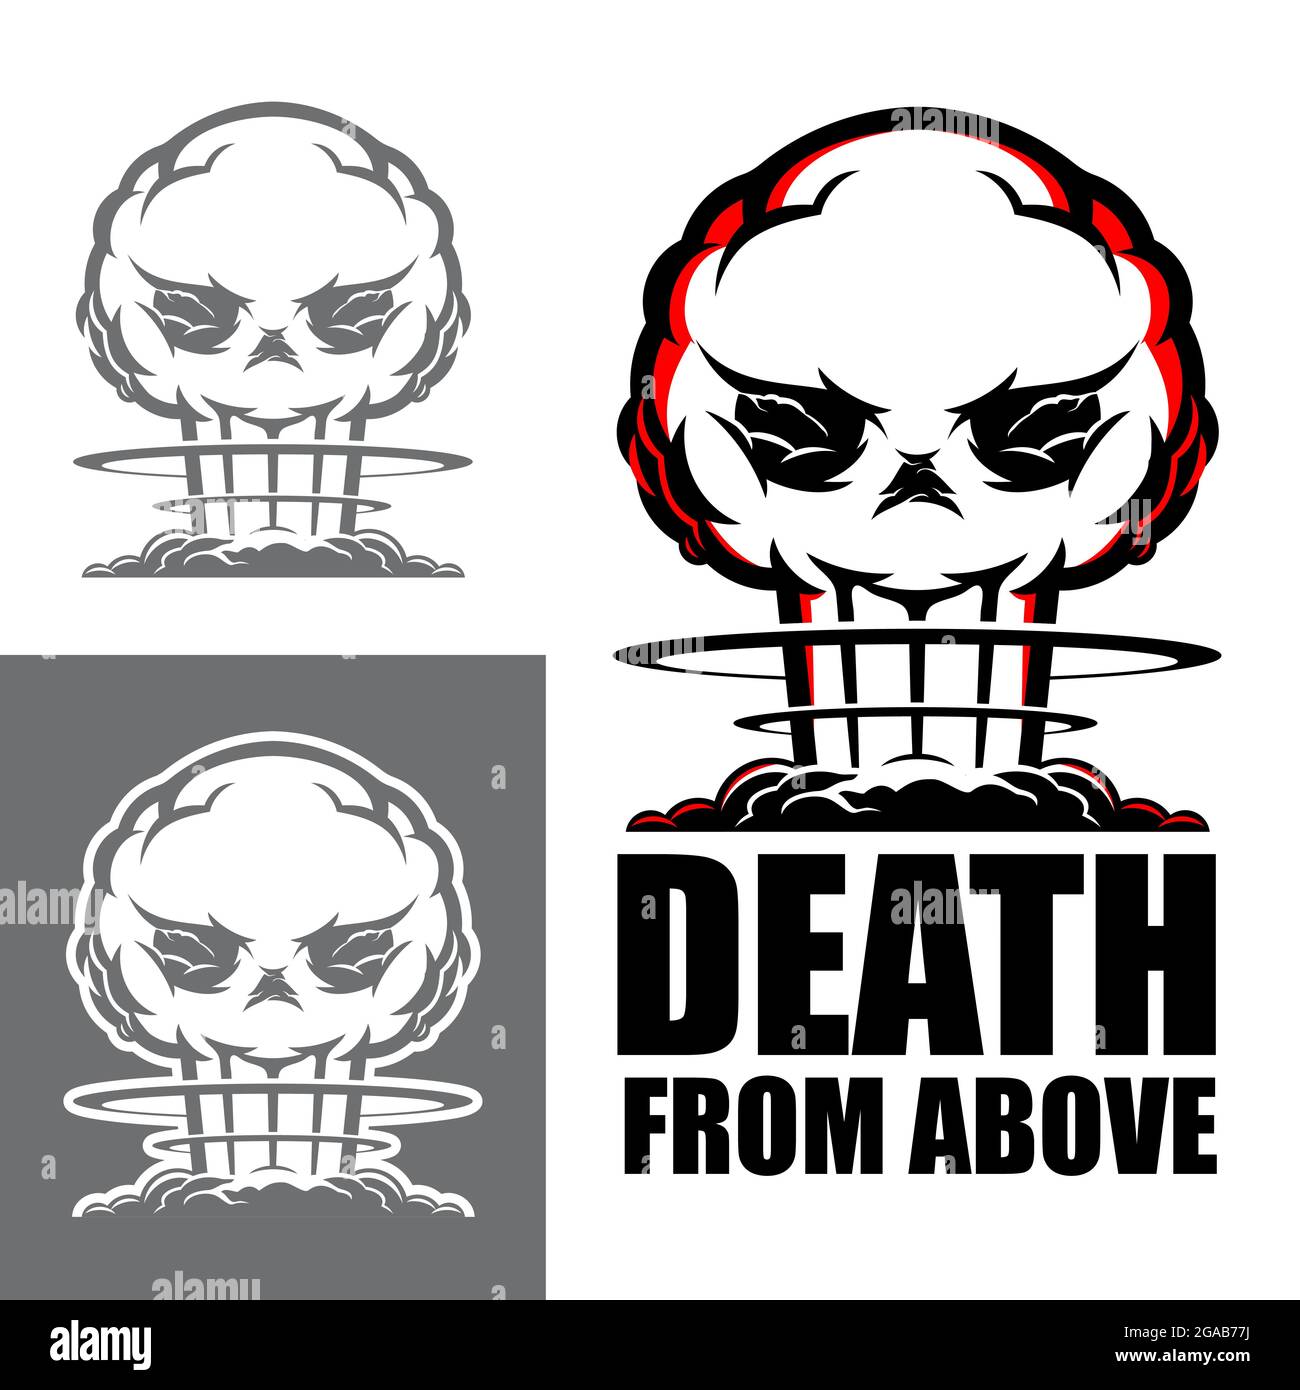 Death from Above symbol vector illustration the deadly atomic blast in skull shape Stock Vector